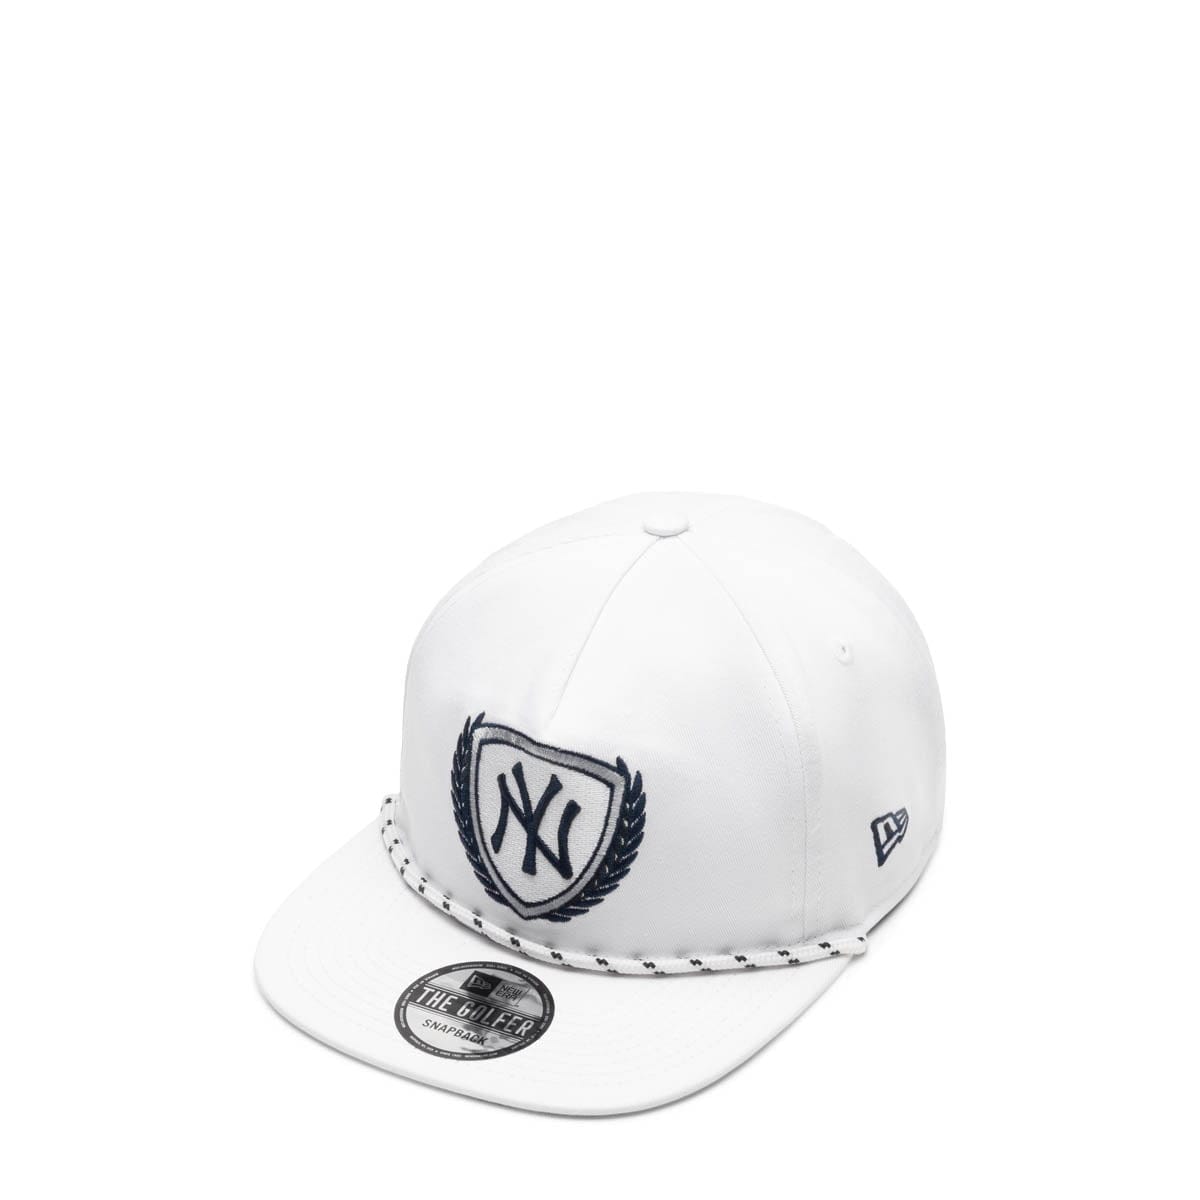 while also browsing other luxurious accessories such as hats and jewelry, NEW YORK YANKEES GOLF CAP WHITE